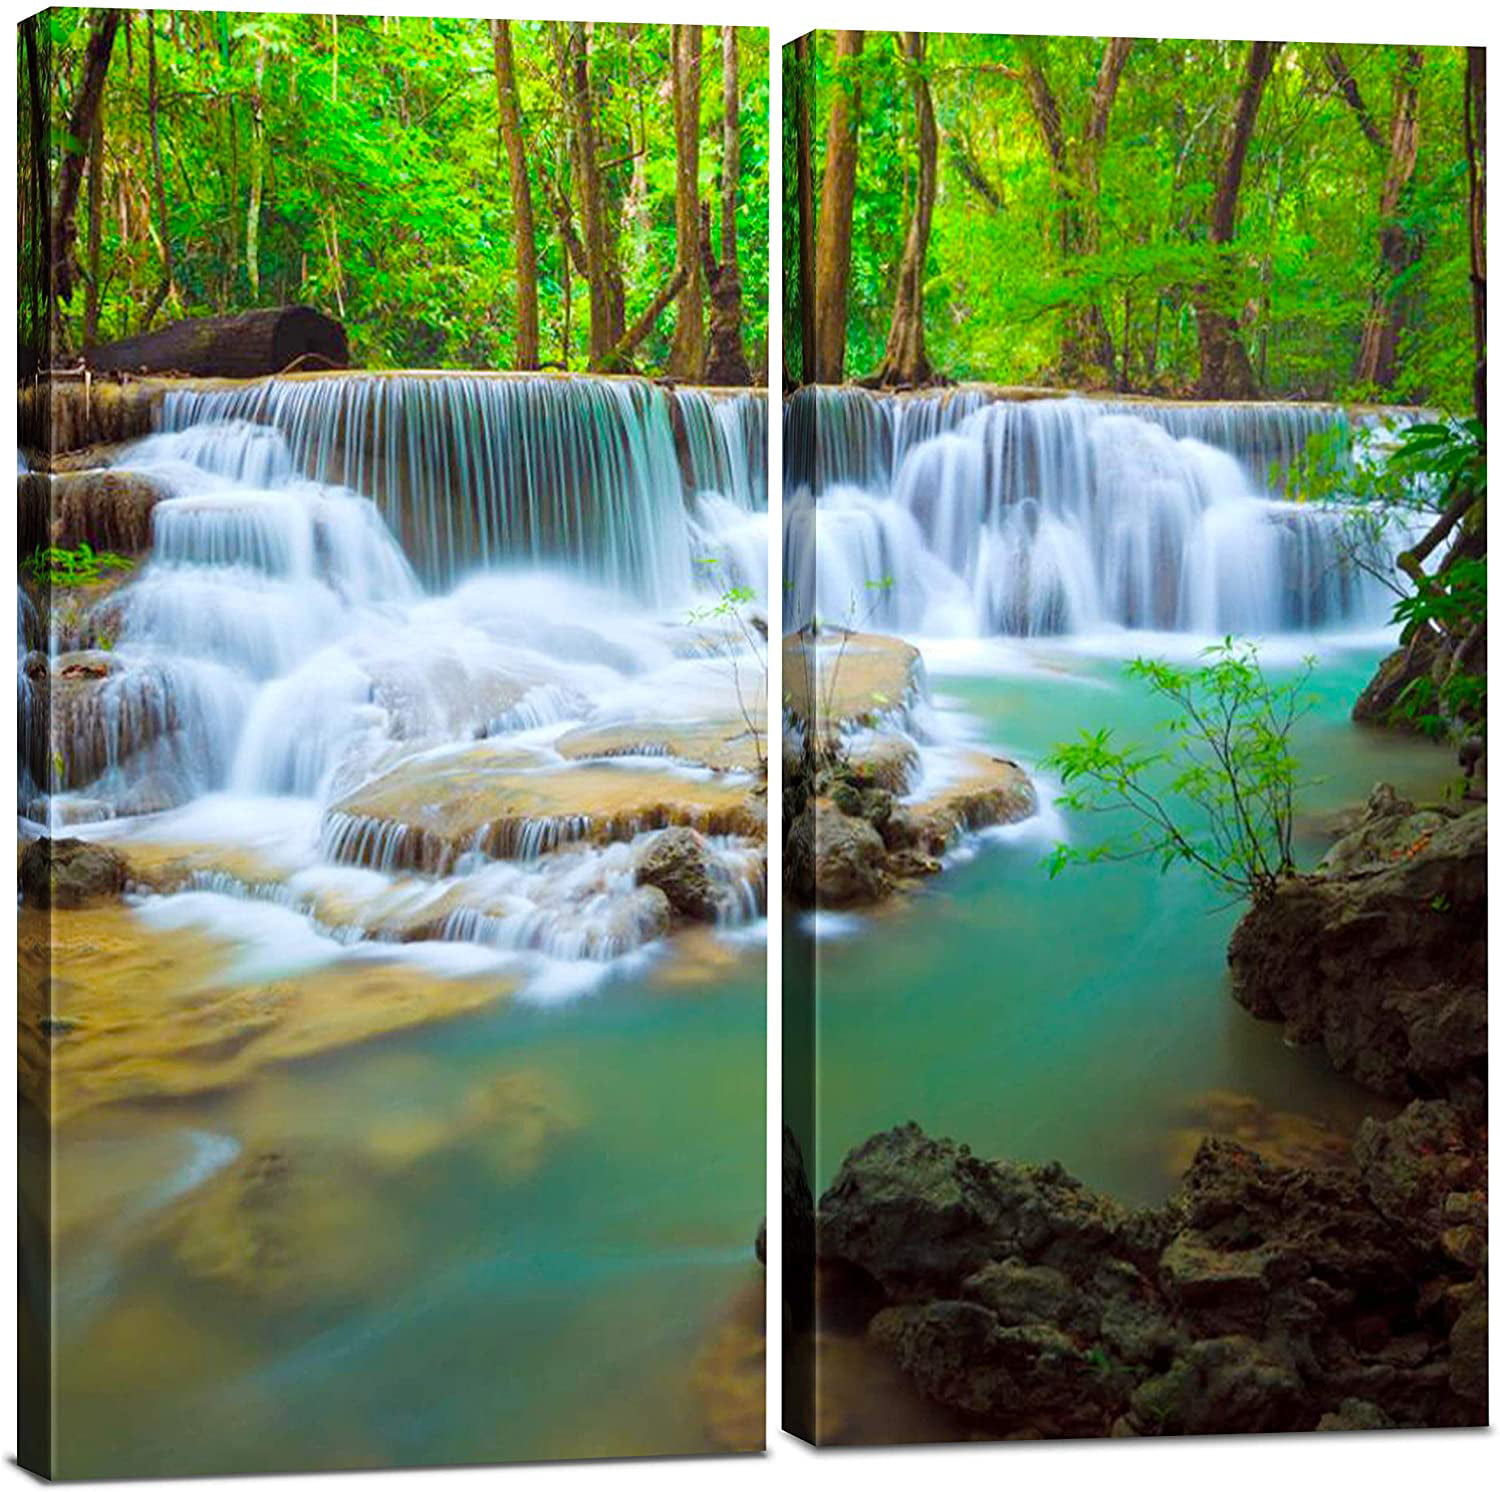 Waterfall Canvas Wall Art Decor Modern 24x24 Hanging Flower Field 2 Panel Print Photograph Decorative Painting Artwork For Kitchen Bedroom Office Living Room Home Gift Men Women Com - Waterfall Wall Art With Sound